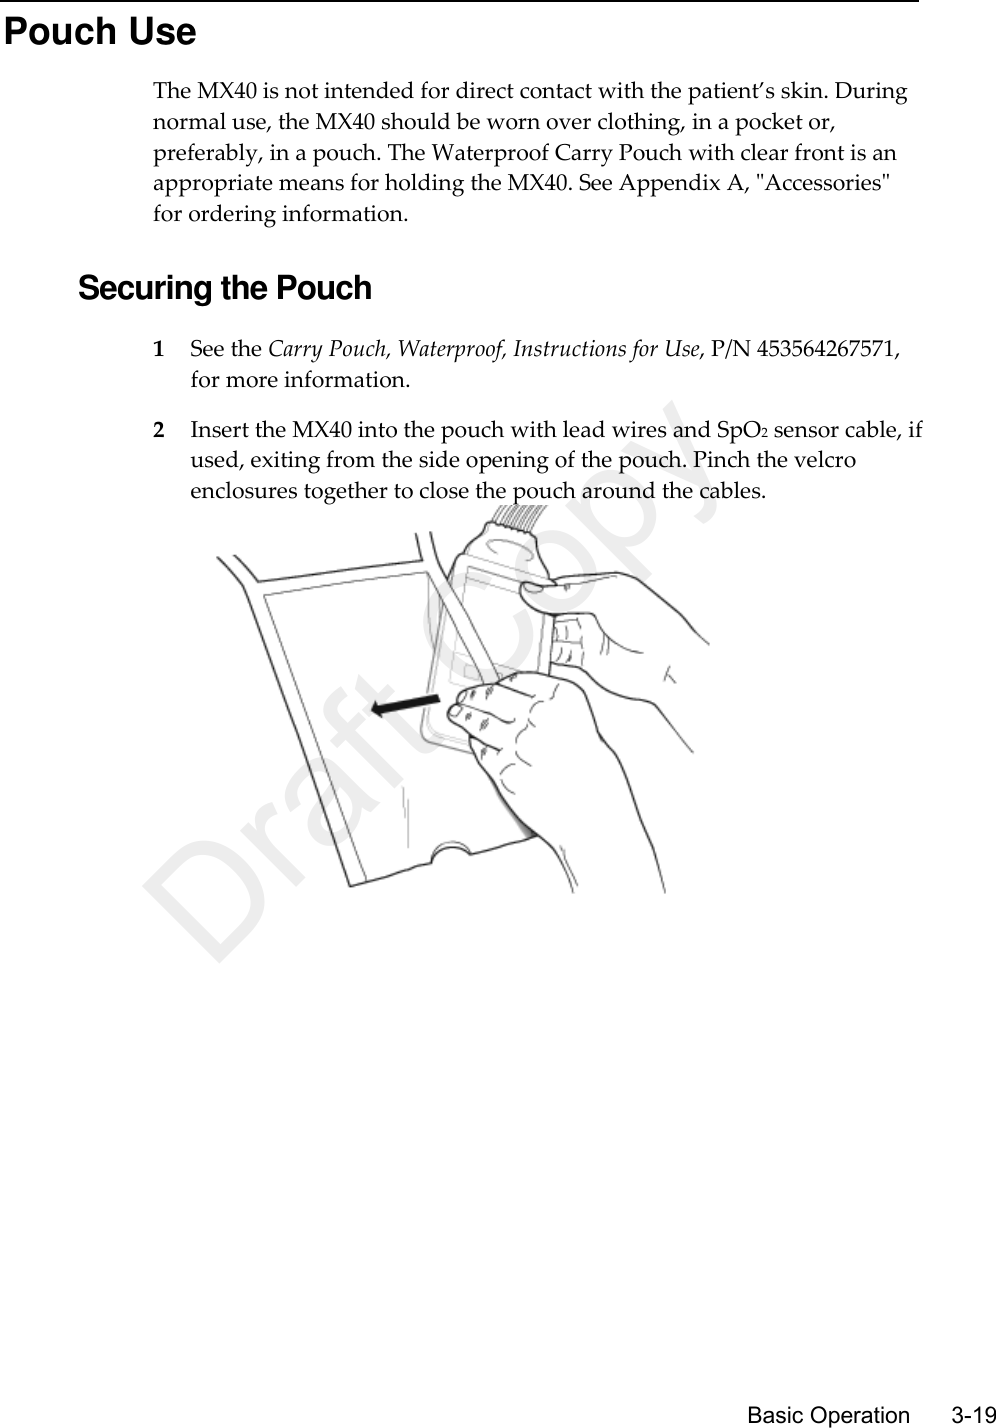      Basic Operation      3-19 Pouch Use The MX40 is not intended for direct contact with the patient’s skin. During normal use, the MX40 should be worn over clothing, in a pocket or, preferably, in a pouch. The Waterproof Carry Pouch with clear front is an appropriate means for holding the MX40. See Appendix A, &quot;Accessories&quot; for ordering information.  Securing the Pouch 1 See the Carry Pouch, Waterproof, Instructions for Use, P/N 453564267571, for more information. 2 Insert the MX40 into the pouch with lead wires and SpO2 sensor cable, if used, exiting from the side opening of the pouch. Pinch the velcro enclosures together to close the pouch around the cables.   Draft Copy